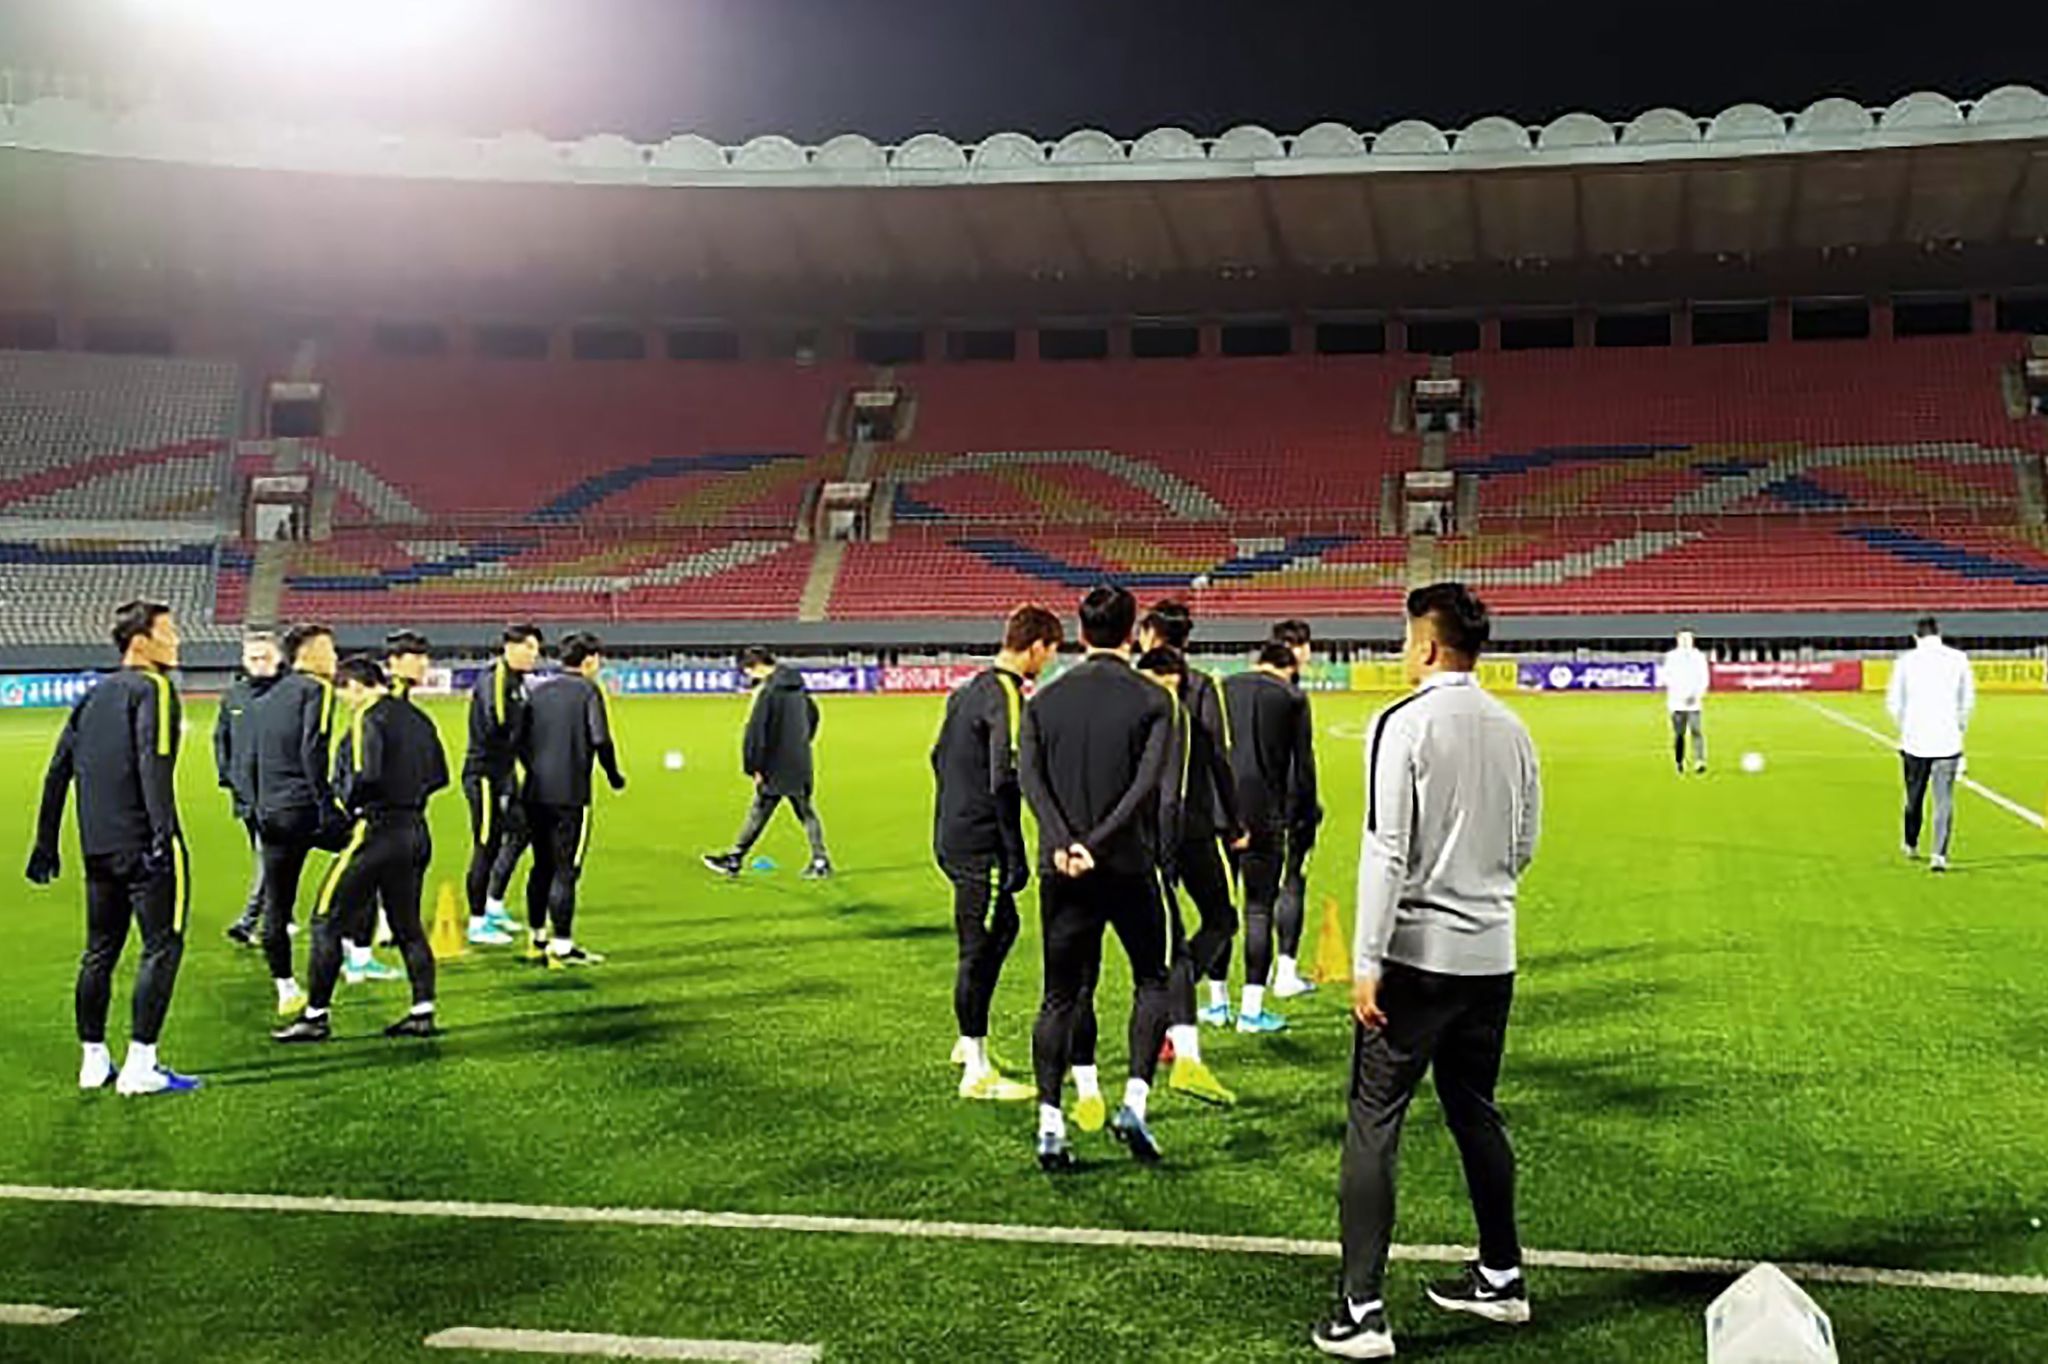 This handout photo taken on October 14, 2019 by the <HIT>Korea</HIT> Football Association (KFA) shows South Korean national football team players warming up during an official training session at Kim Il Sung Stadium in Pyongyang, ahead of the World Cup 2022 Qualifying Asian zone Group H football match between South <HIT>Korea</HIT> and <HIT>North</HIT><HIT>Korea.</HIT> - The teams -- with Tottenhams star forward Son Heung-min included in the South Korean squad -- are expected to face each other at the Kim Il Sung Stadium on October 15. This will be the first competitive mens game between the two sides to be held in Pyongyang, and has raised hopes for new momentum in ties between the two <HIT>Koreas</HIT>. (Photo by Handout / KFA / AFP) / RESTRICTED TO EDITORIAL USE - MANDATORY CREDIT "AFP PHOTO / KFA" - NO MARKETING NO ADVERTISING CAMPAIGNS - DISTRIBUTED AS A SERVICE TO CLIENTS == NO ARCHIVE